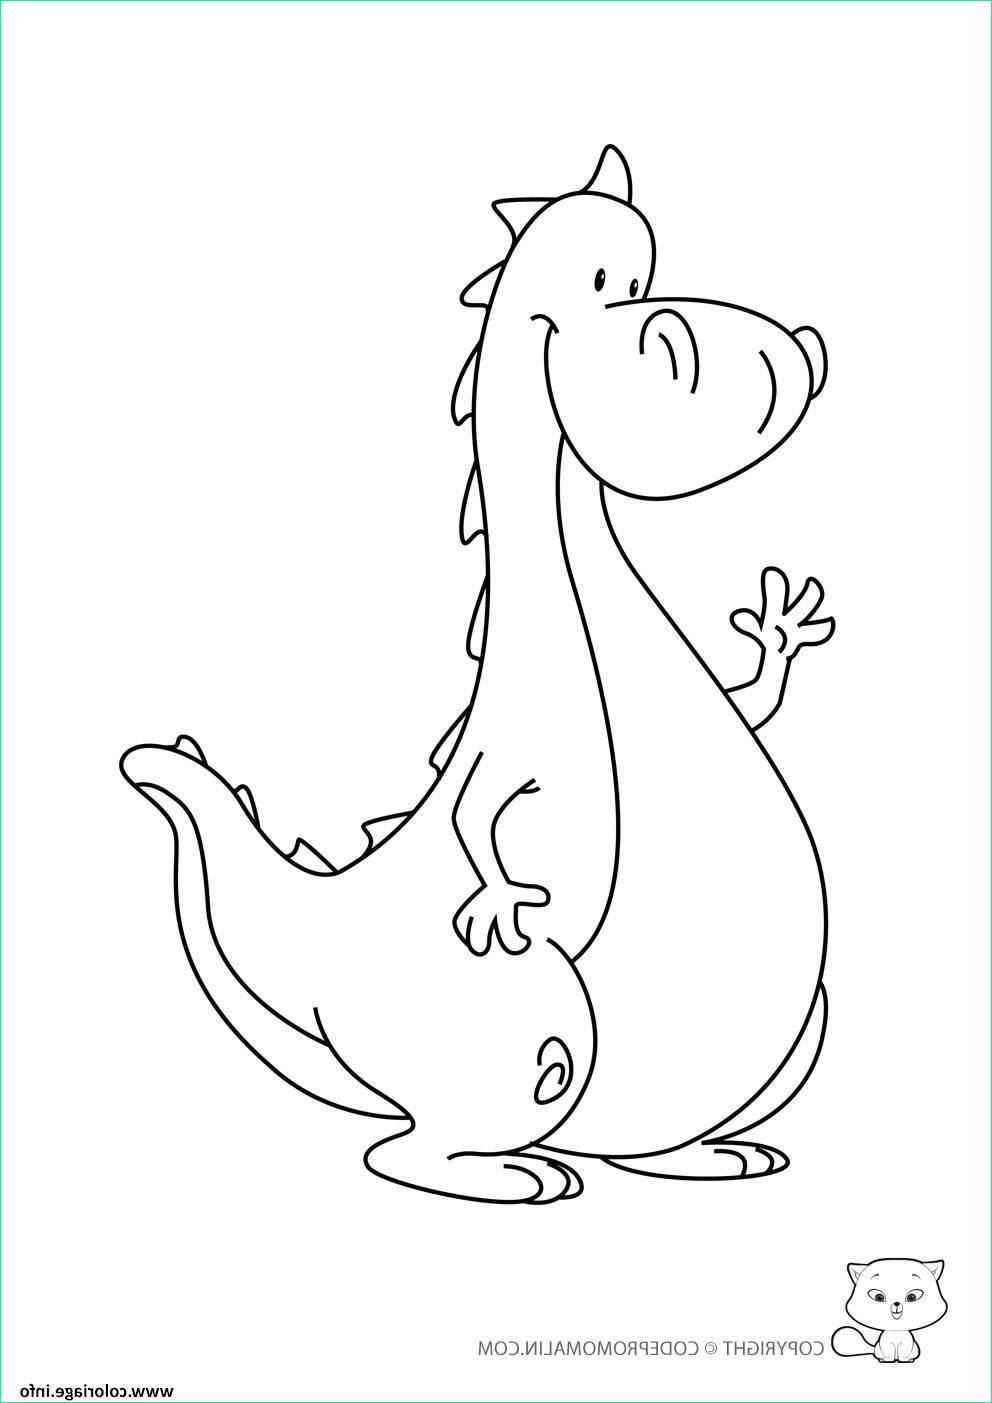 Dessin Dinosaure Simple Luxe Images Coloriage Dinosaure 150 Dessin